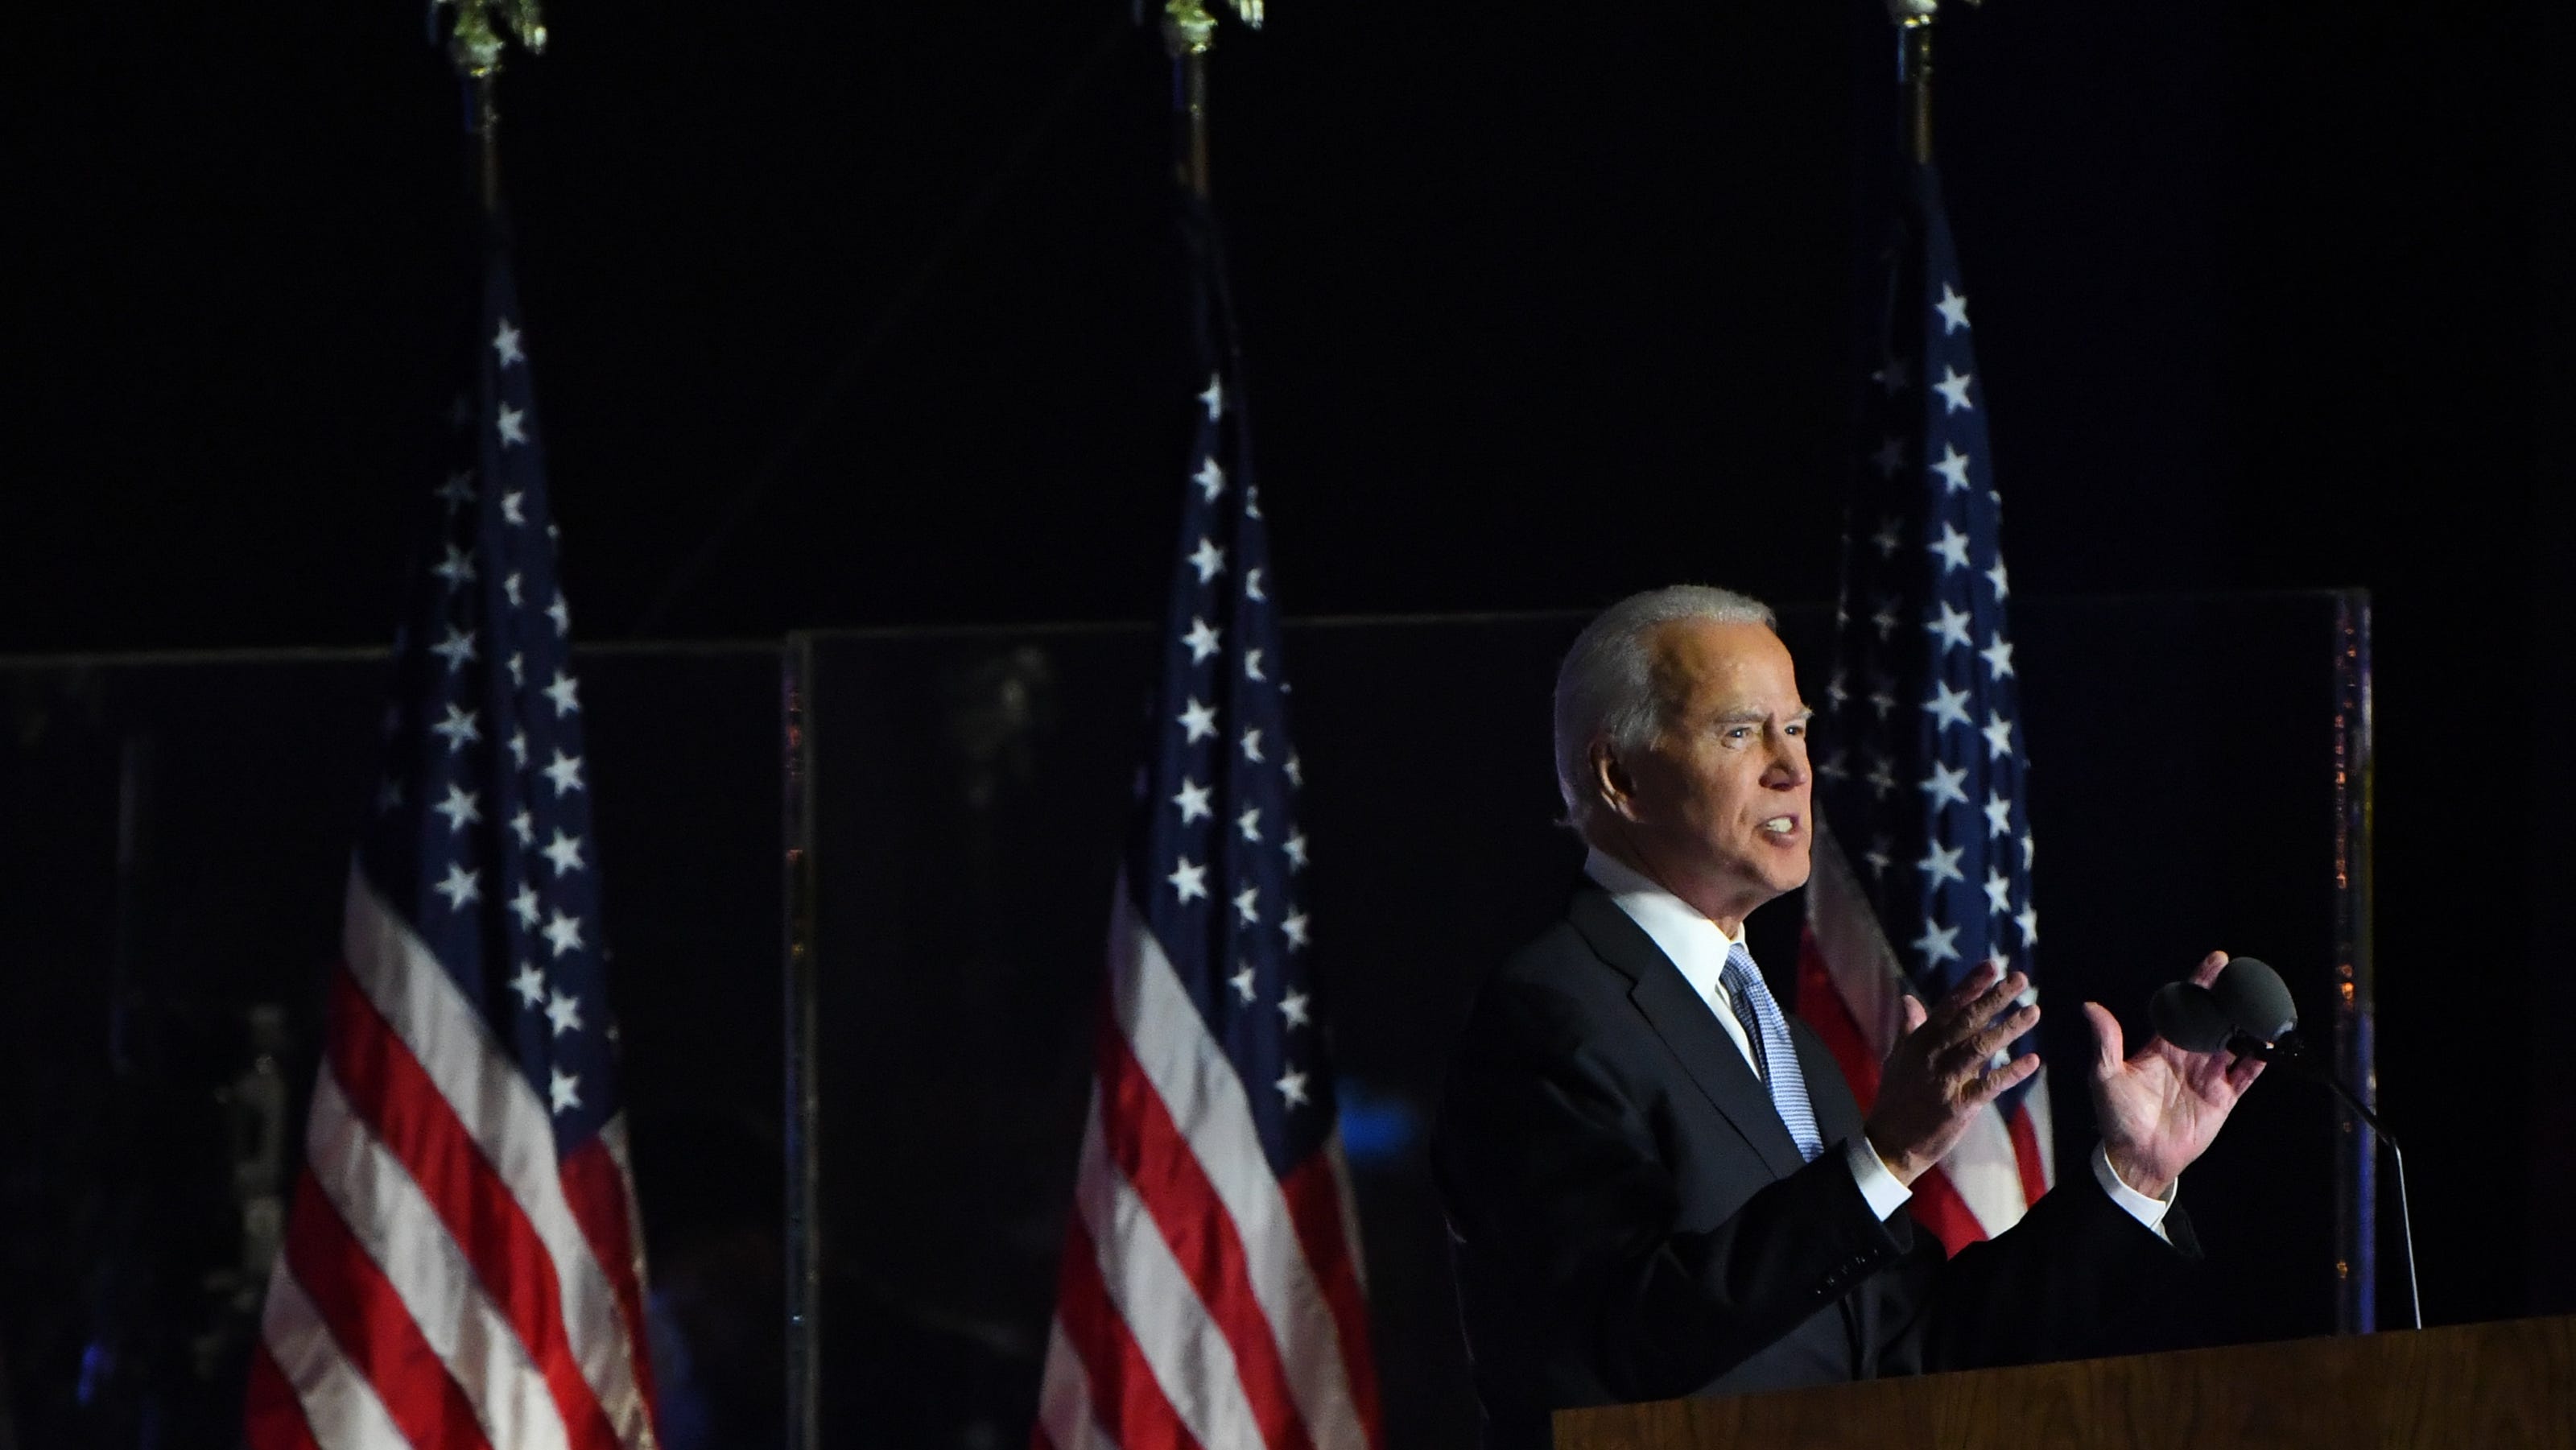 Read Transcript Of What Biden Said In First Speech As President Elect